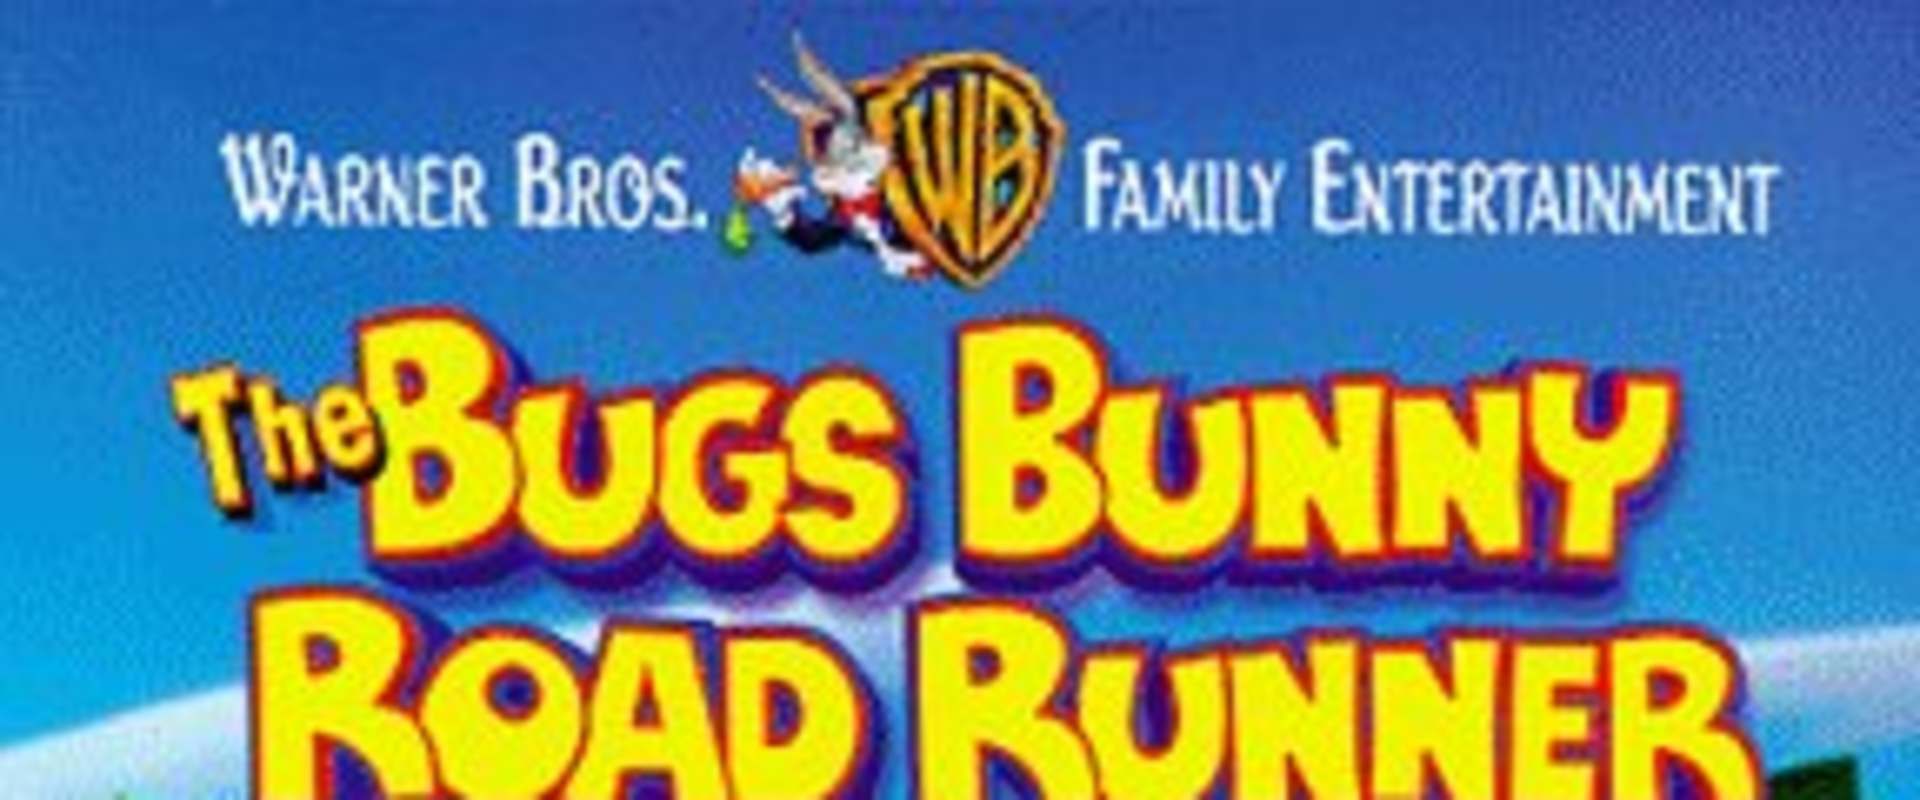 The Bugs Bunny/Road-Runner Movie background 1